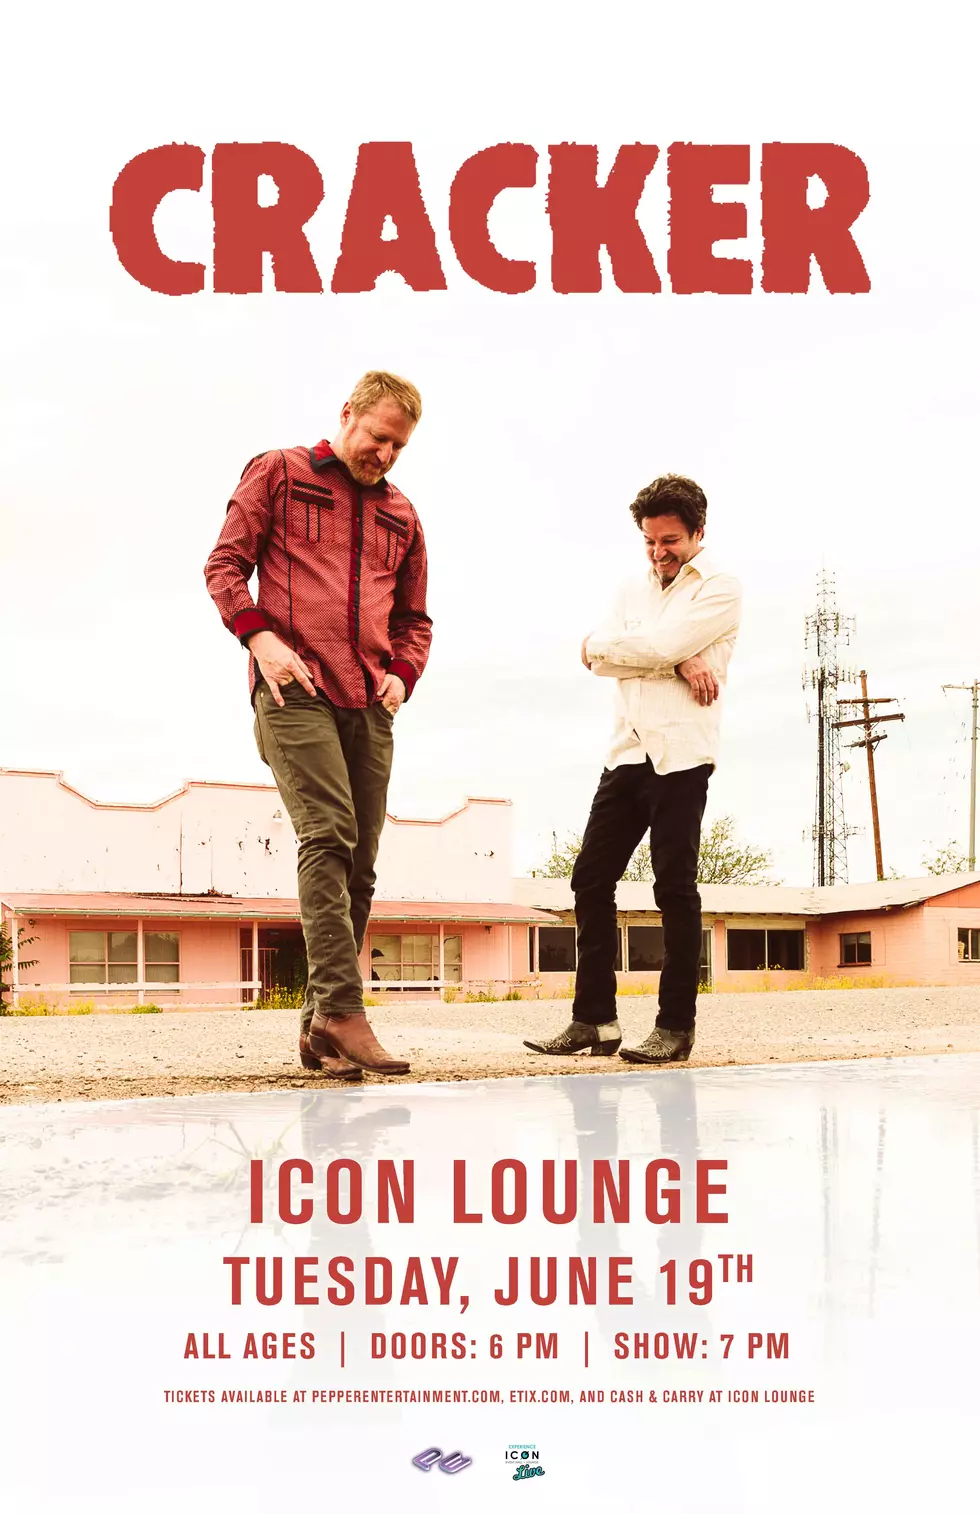 Platinum-Selling and Critically-Acclaimed &#8216;Cracker&#8217; to Rock the Icon Lounge